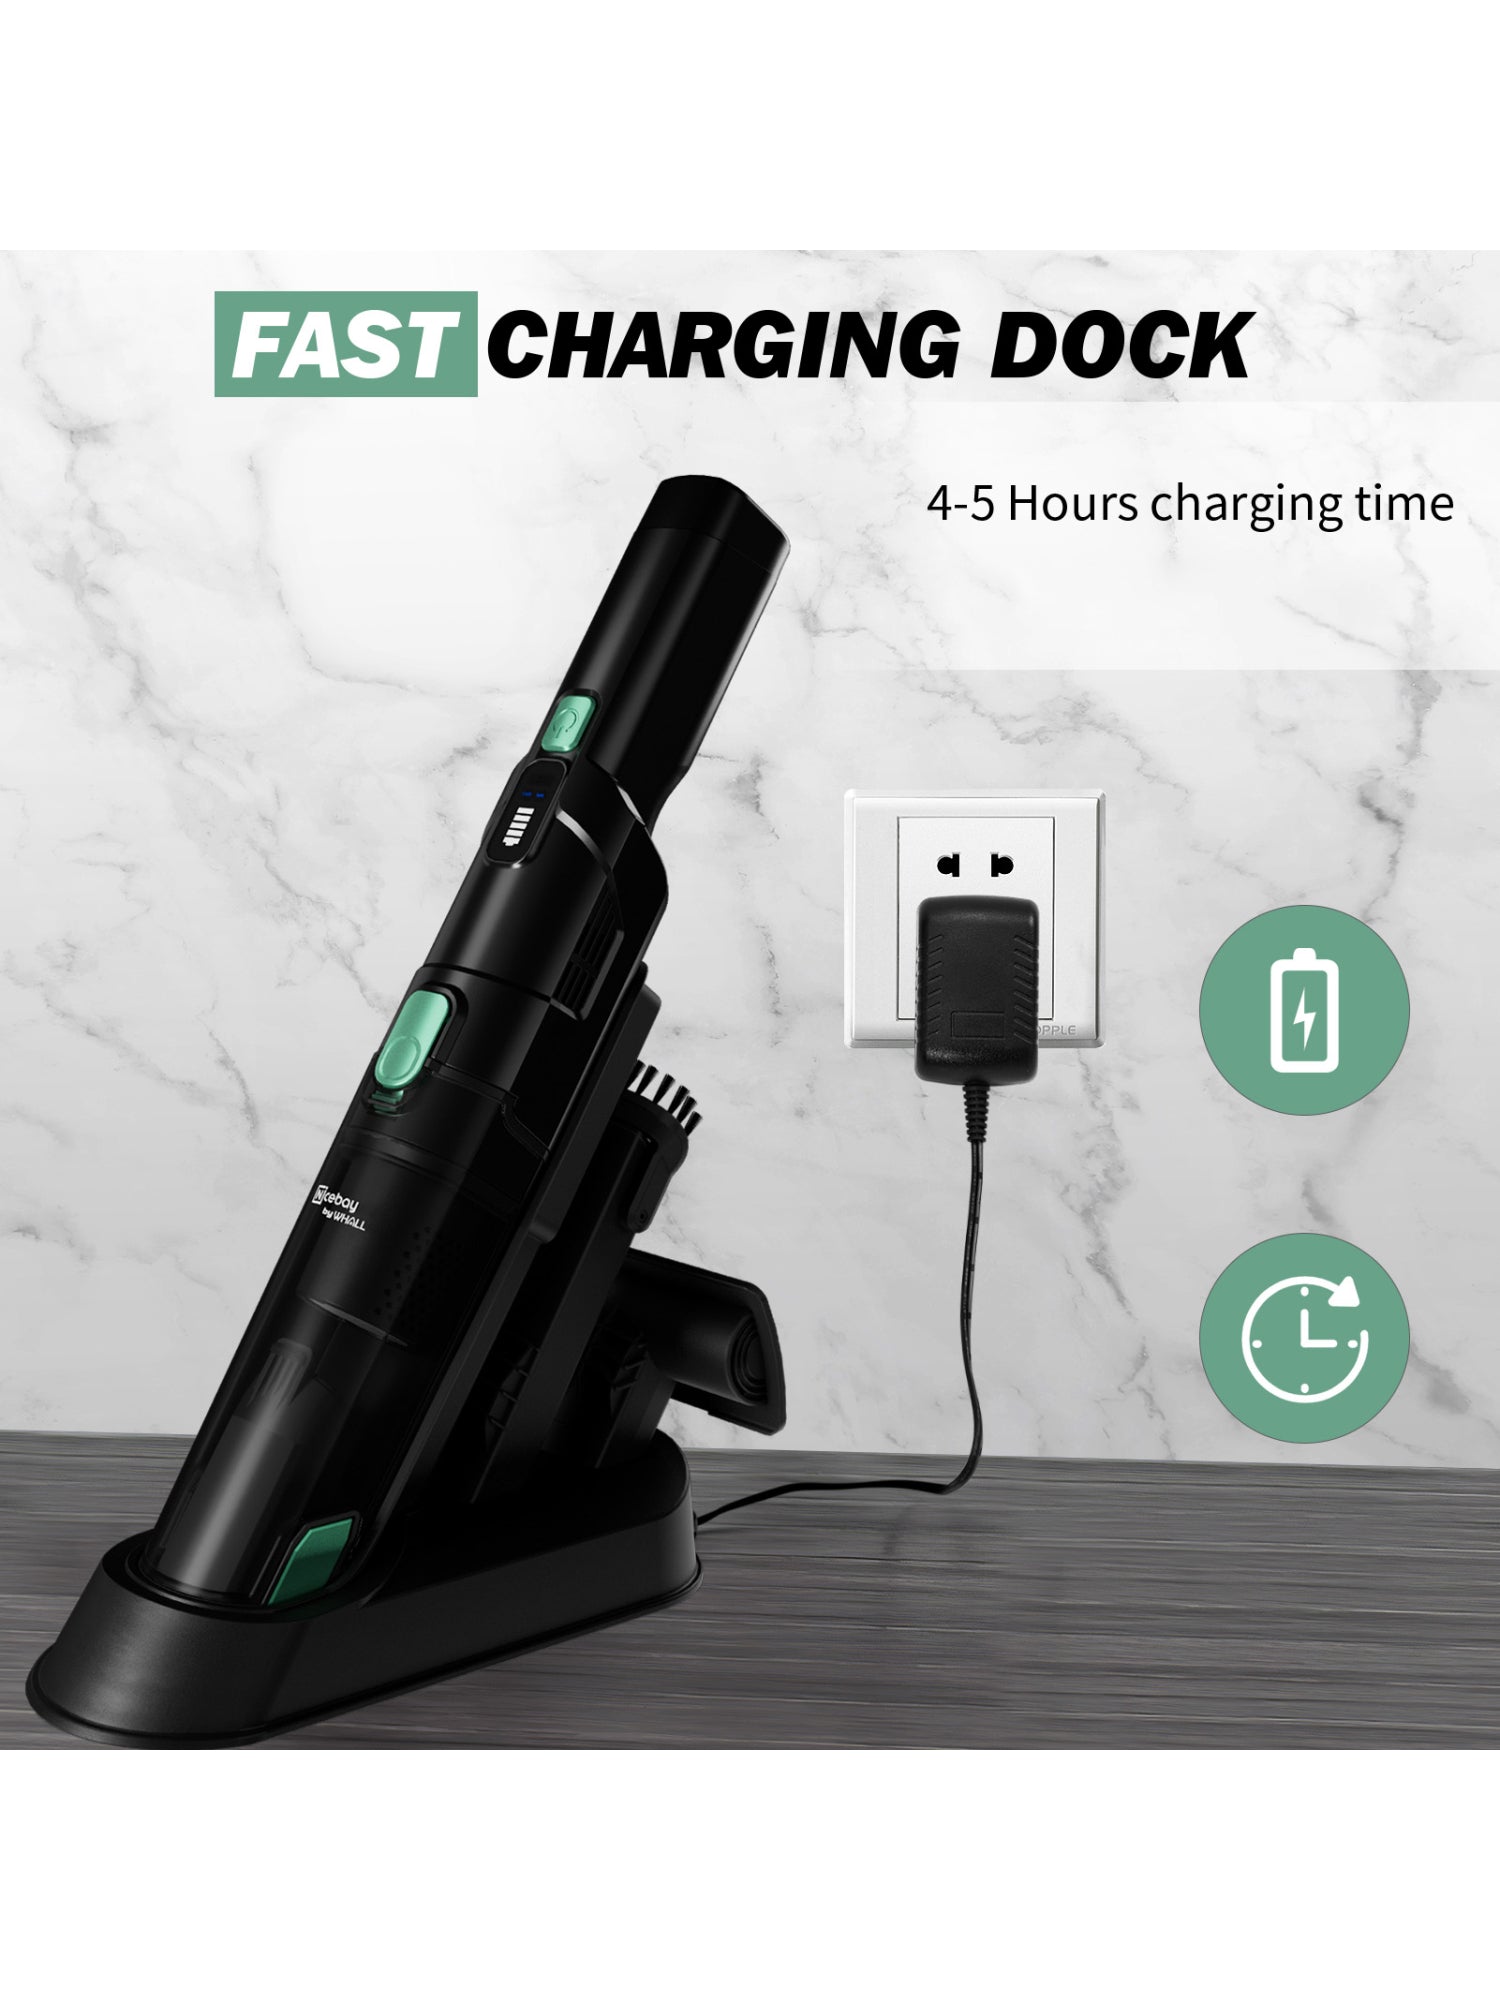 Whall Handheld Cordless Vacuum-Portable Vacuum with 15KPA Strong Suction, Fast Charging Dock, Lightweight